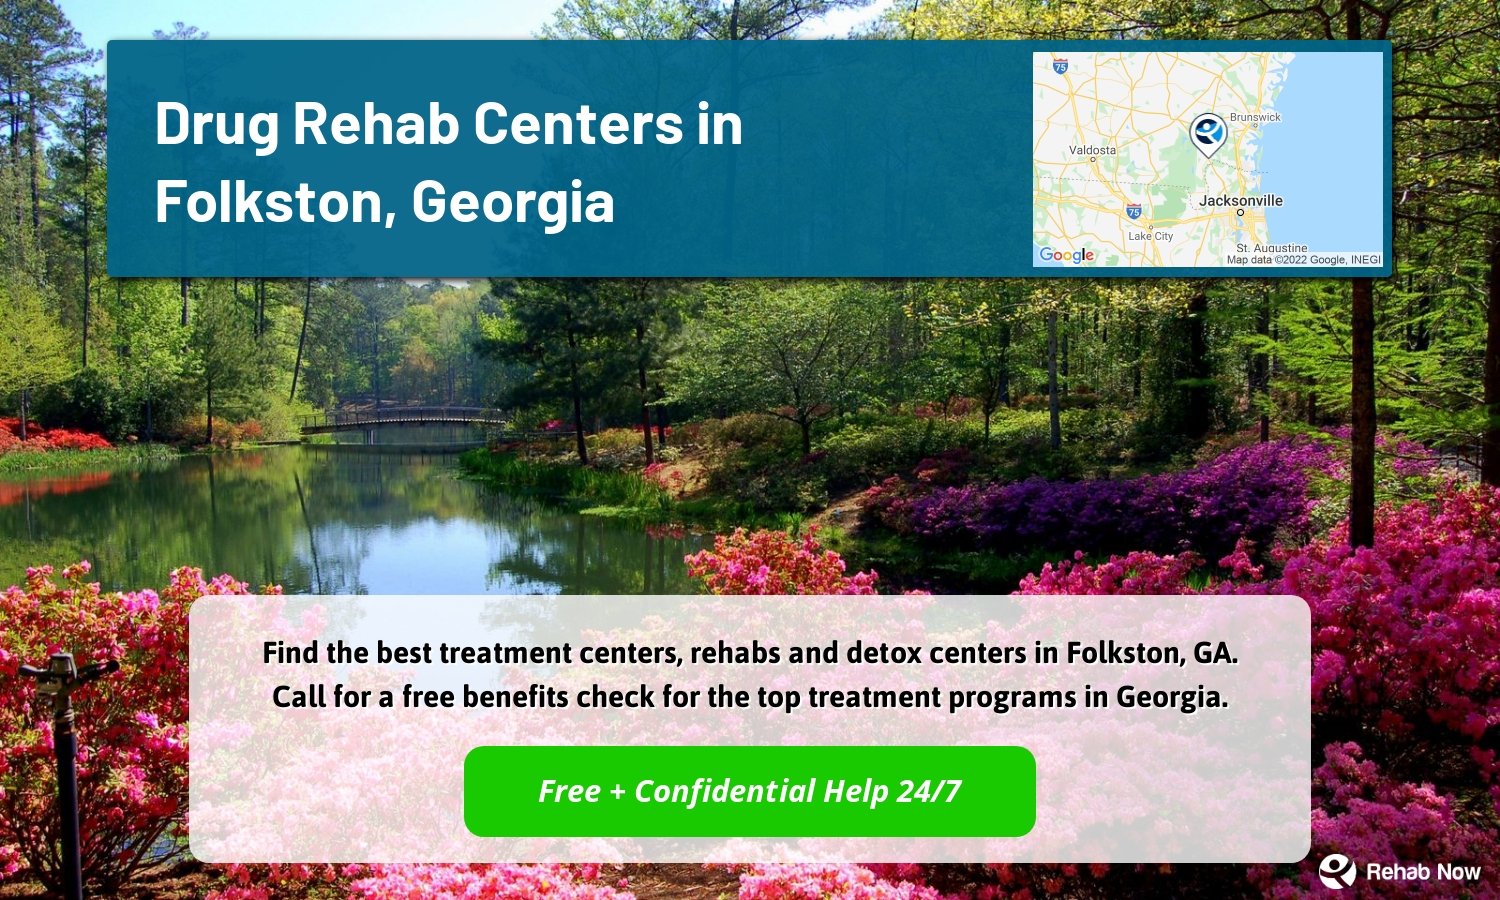 Find the best treatment centers, rehabs and detox centers in Folkston, GA. Call for a free benefits check for the top treatment programs in Georgia.